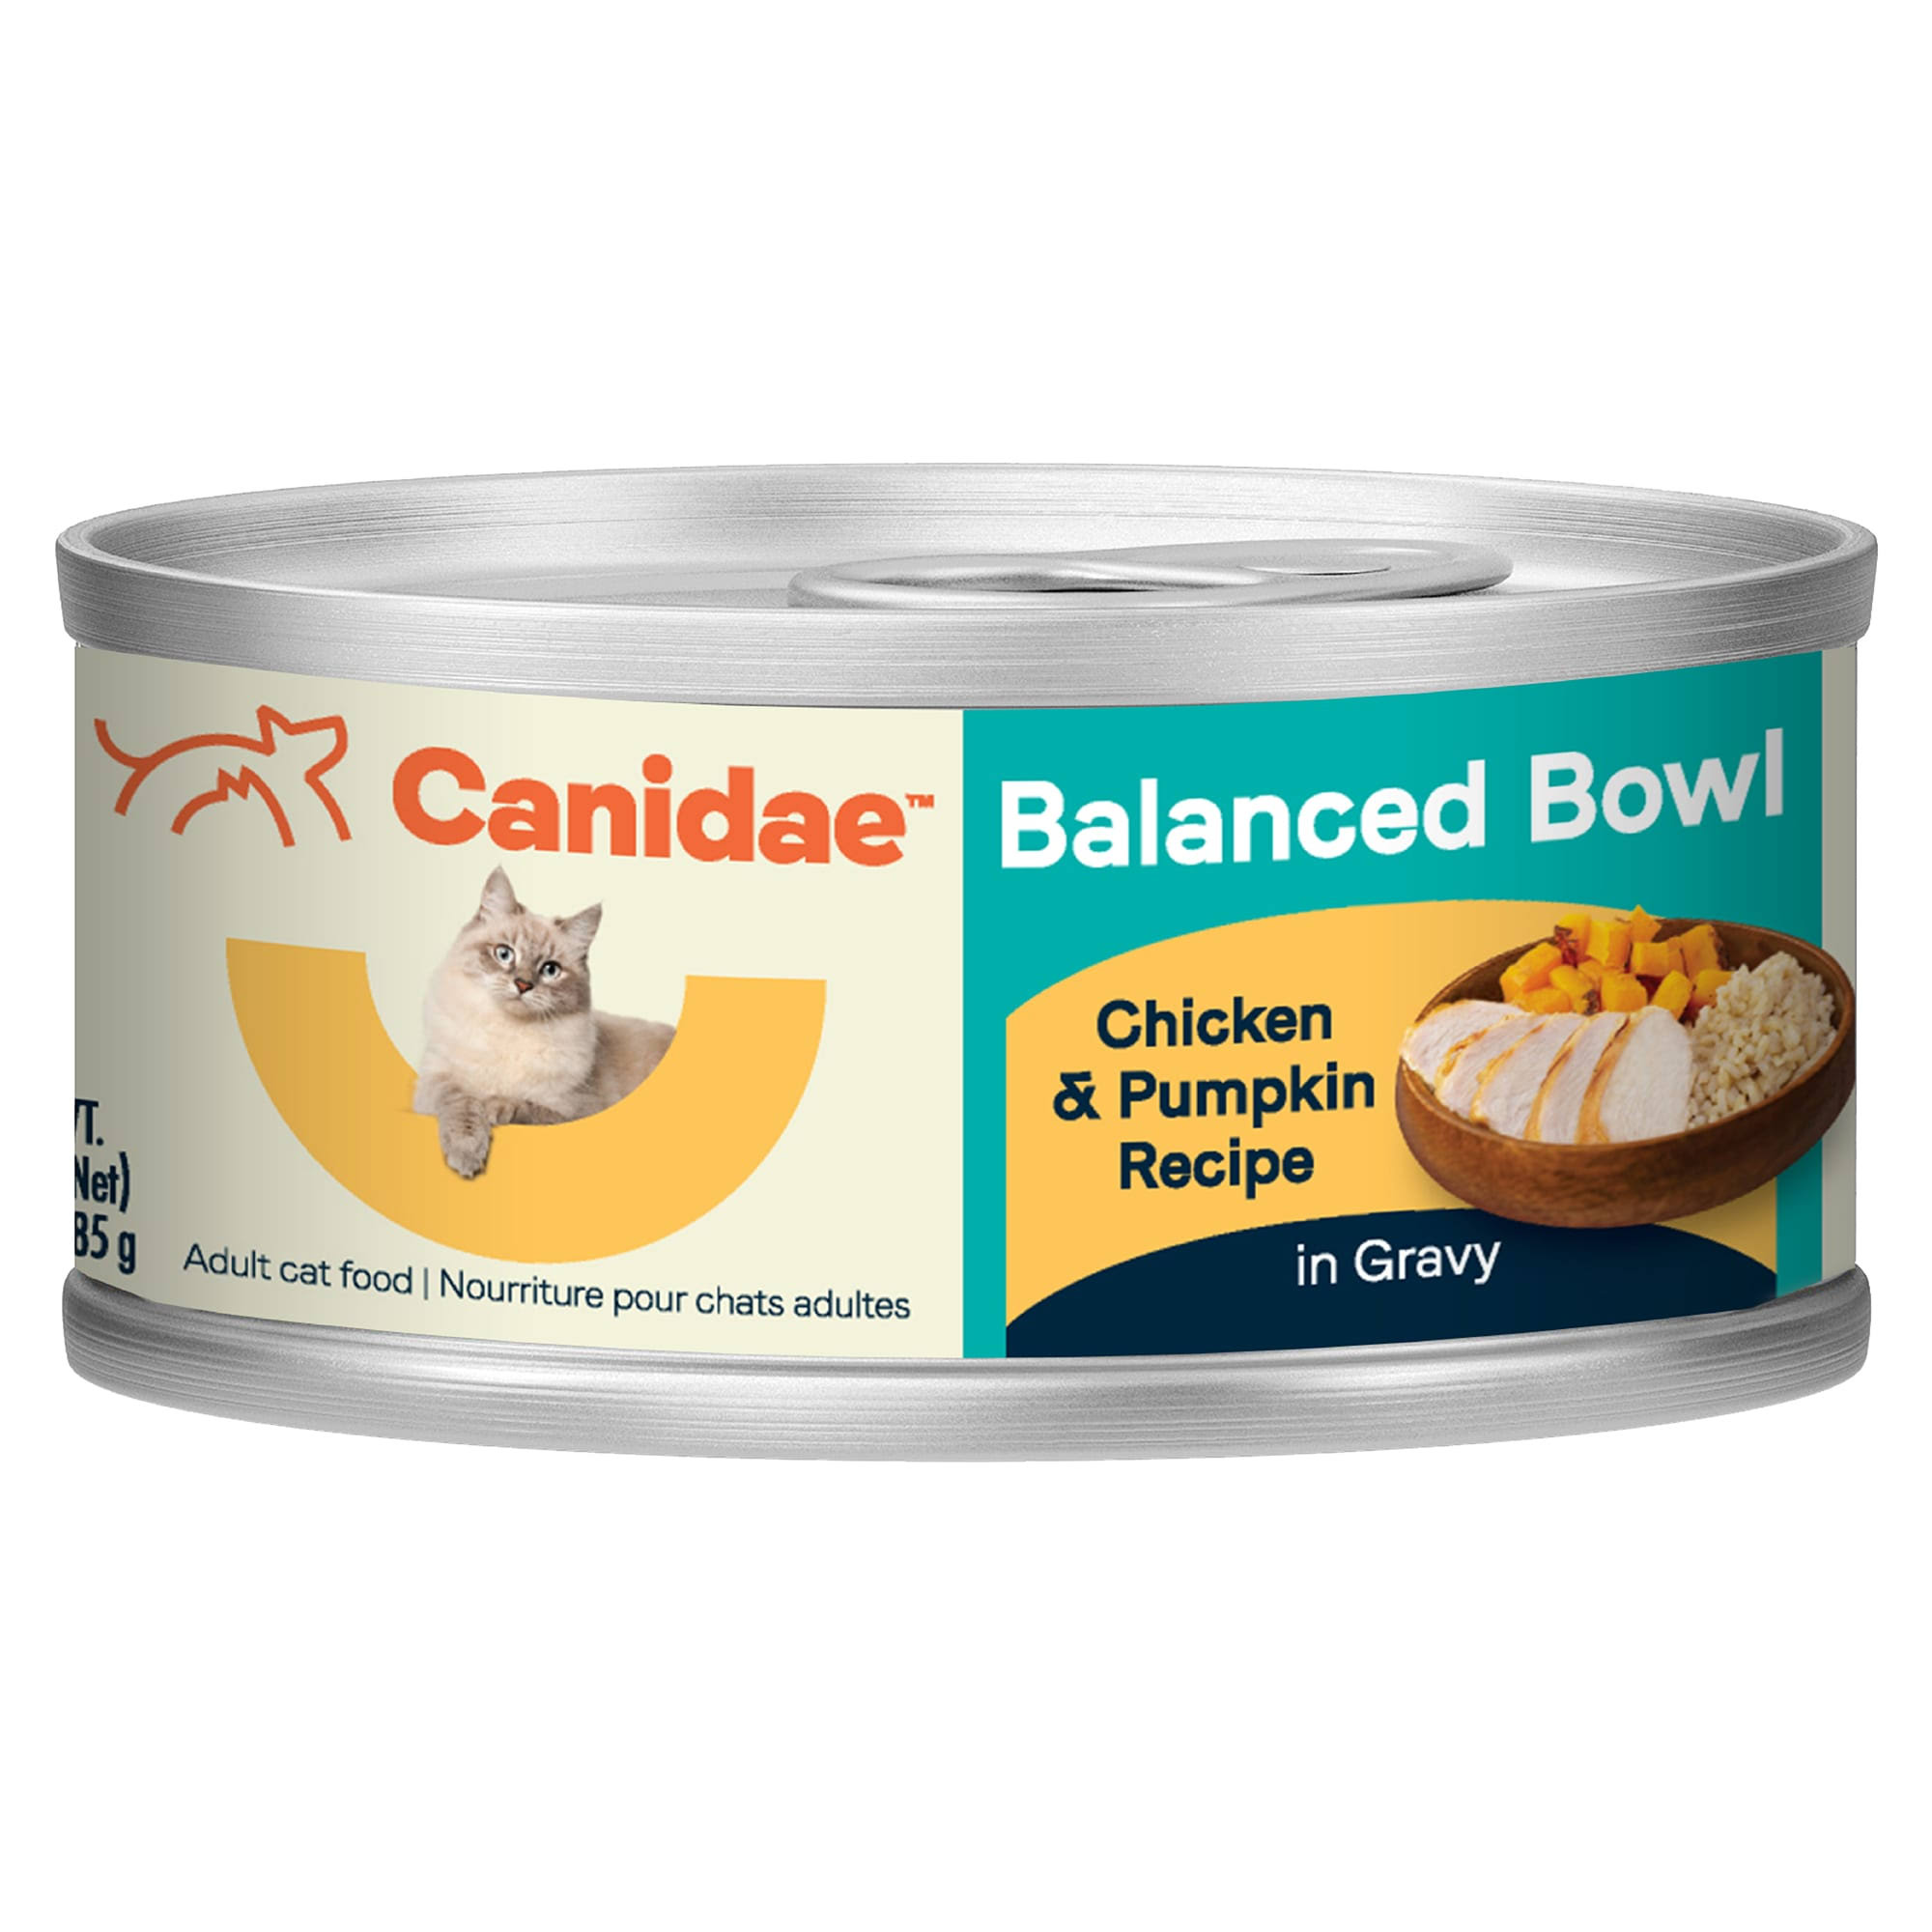 Canidae Balanced Bowl Chicken & Pumpkin Recipe in Gravy Wet Cat Food, 3-oz Can, Case of 24